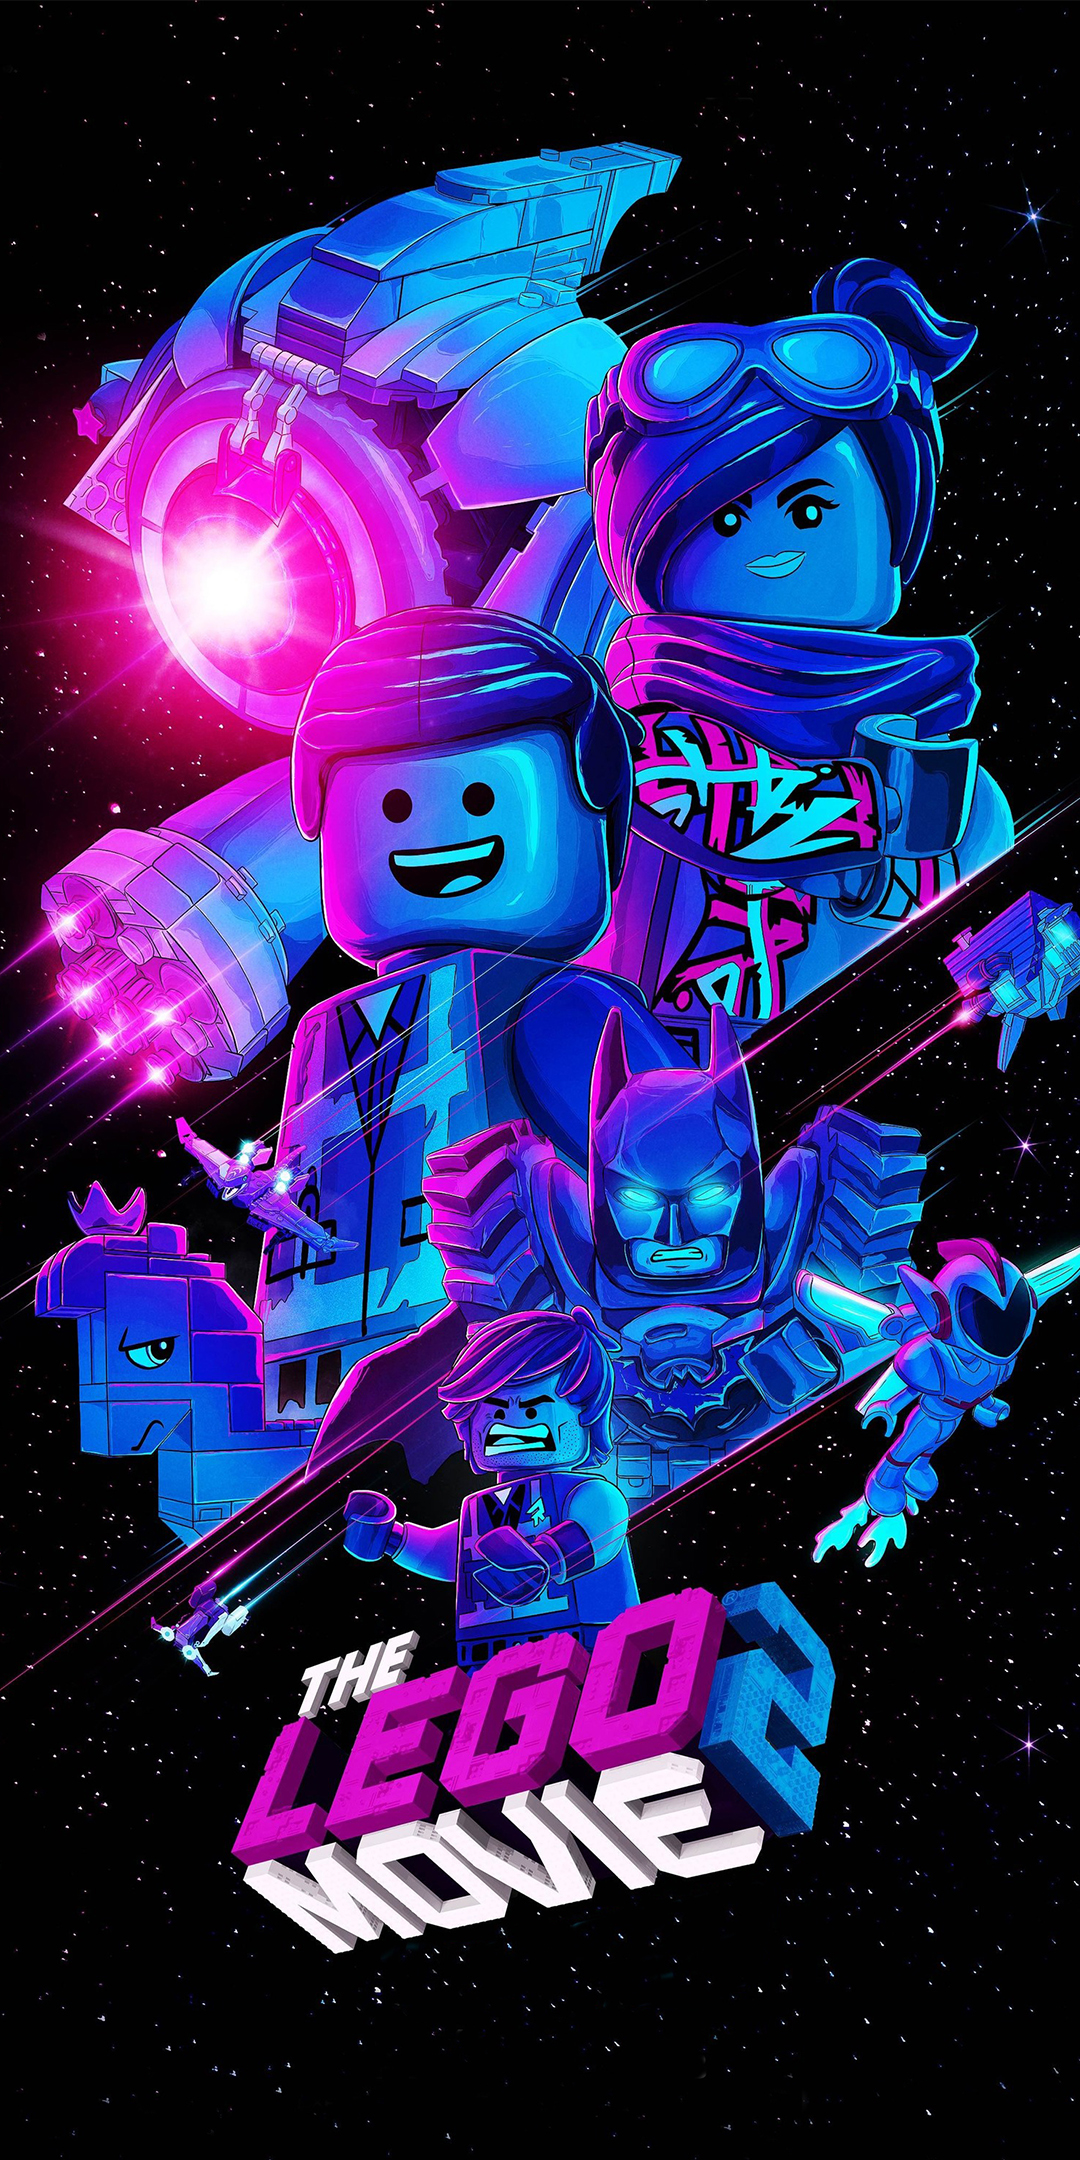 The Lego Movie 2: The Second Part Phone Wallpaper